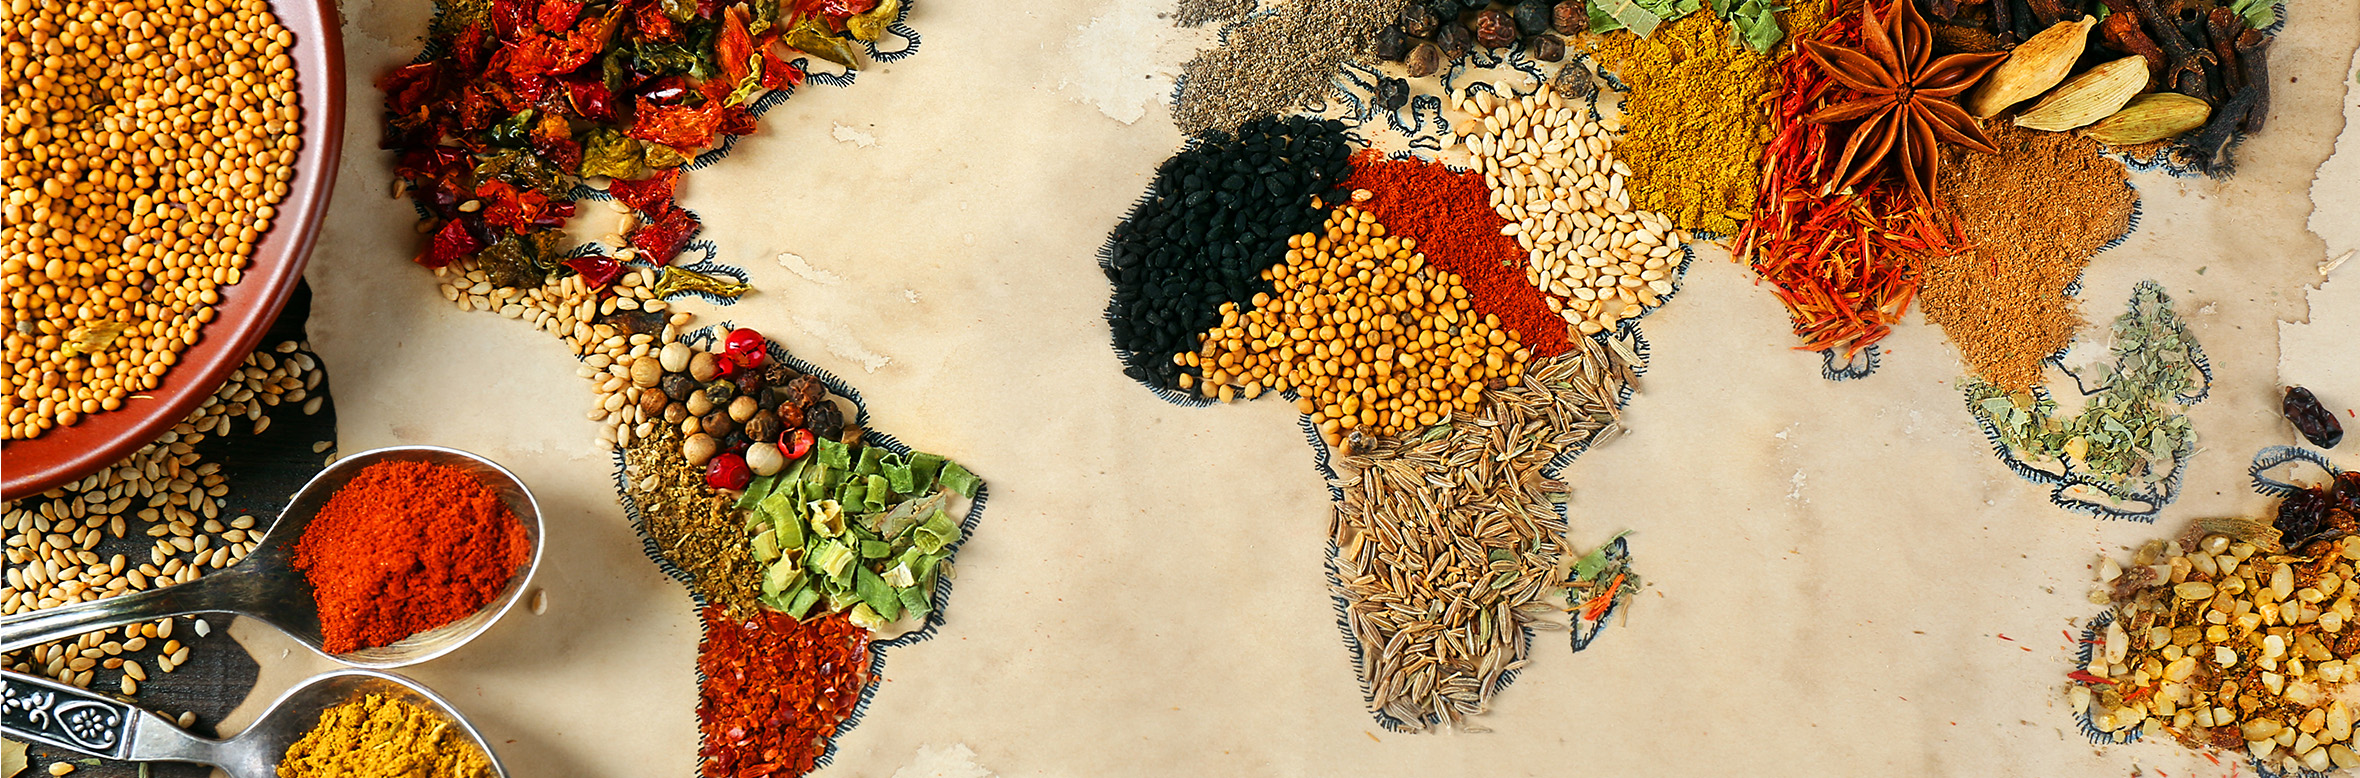 World map made with food grains and spices